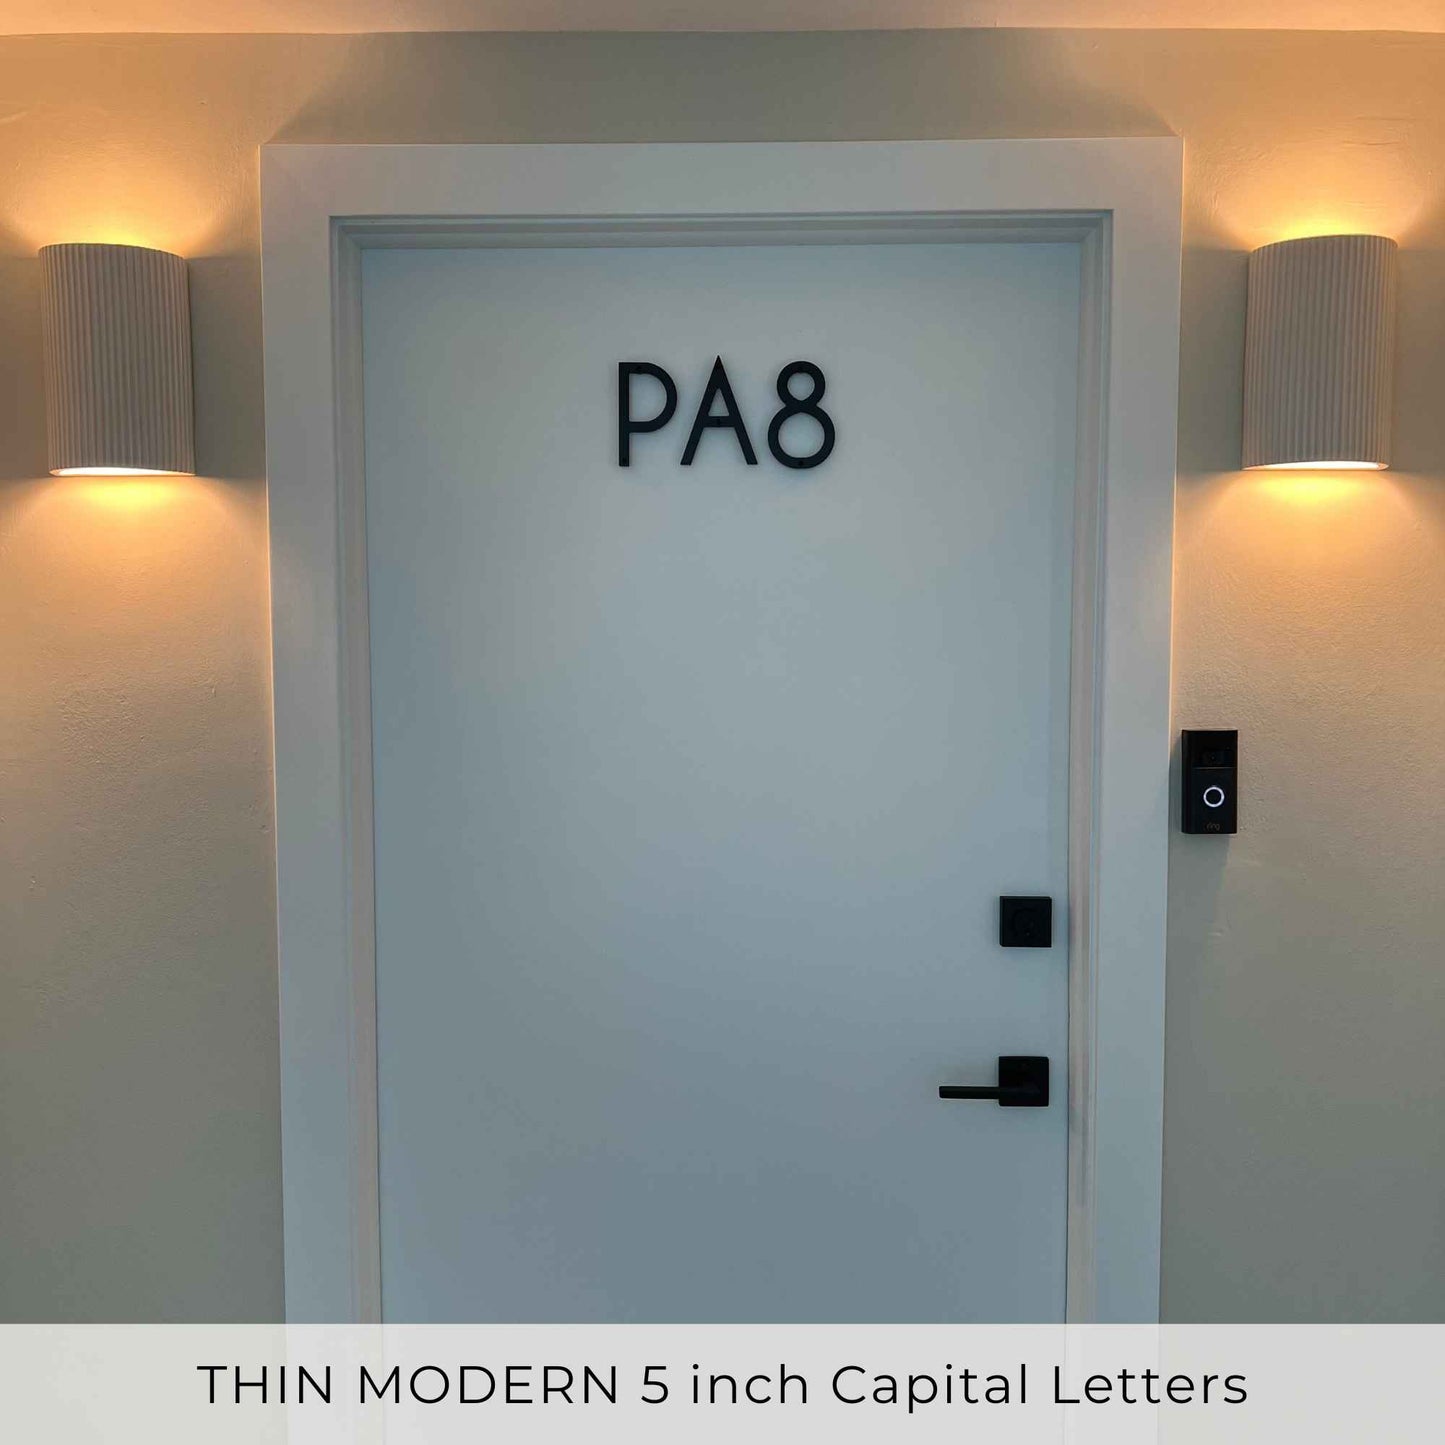 THIN MODERN house numbers and letters to personalize office doors and apartment doors